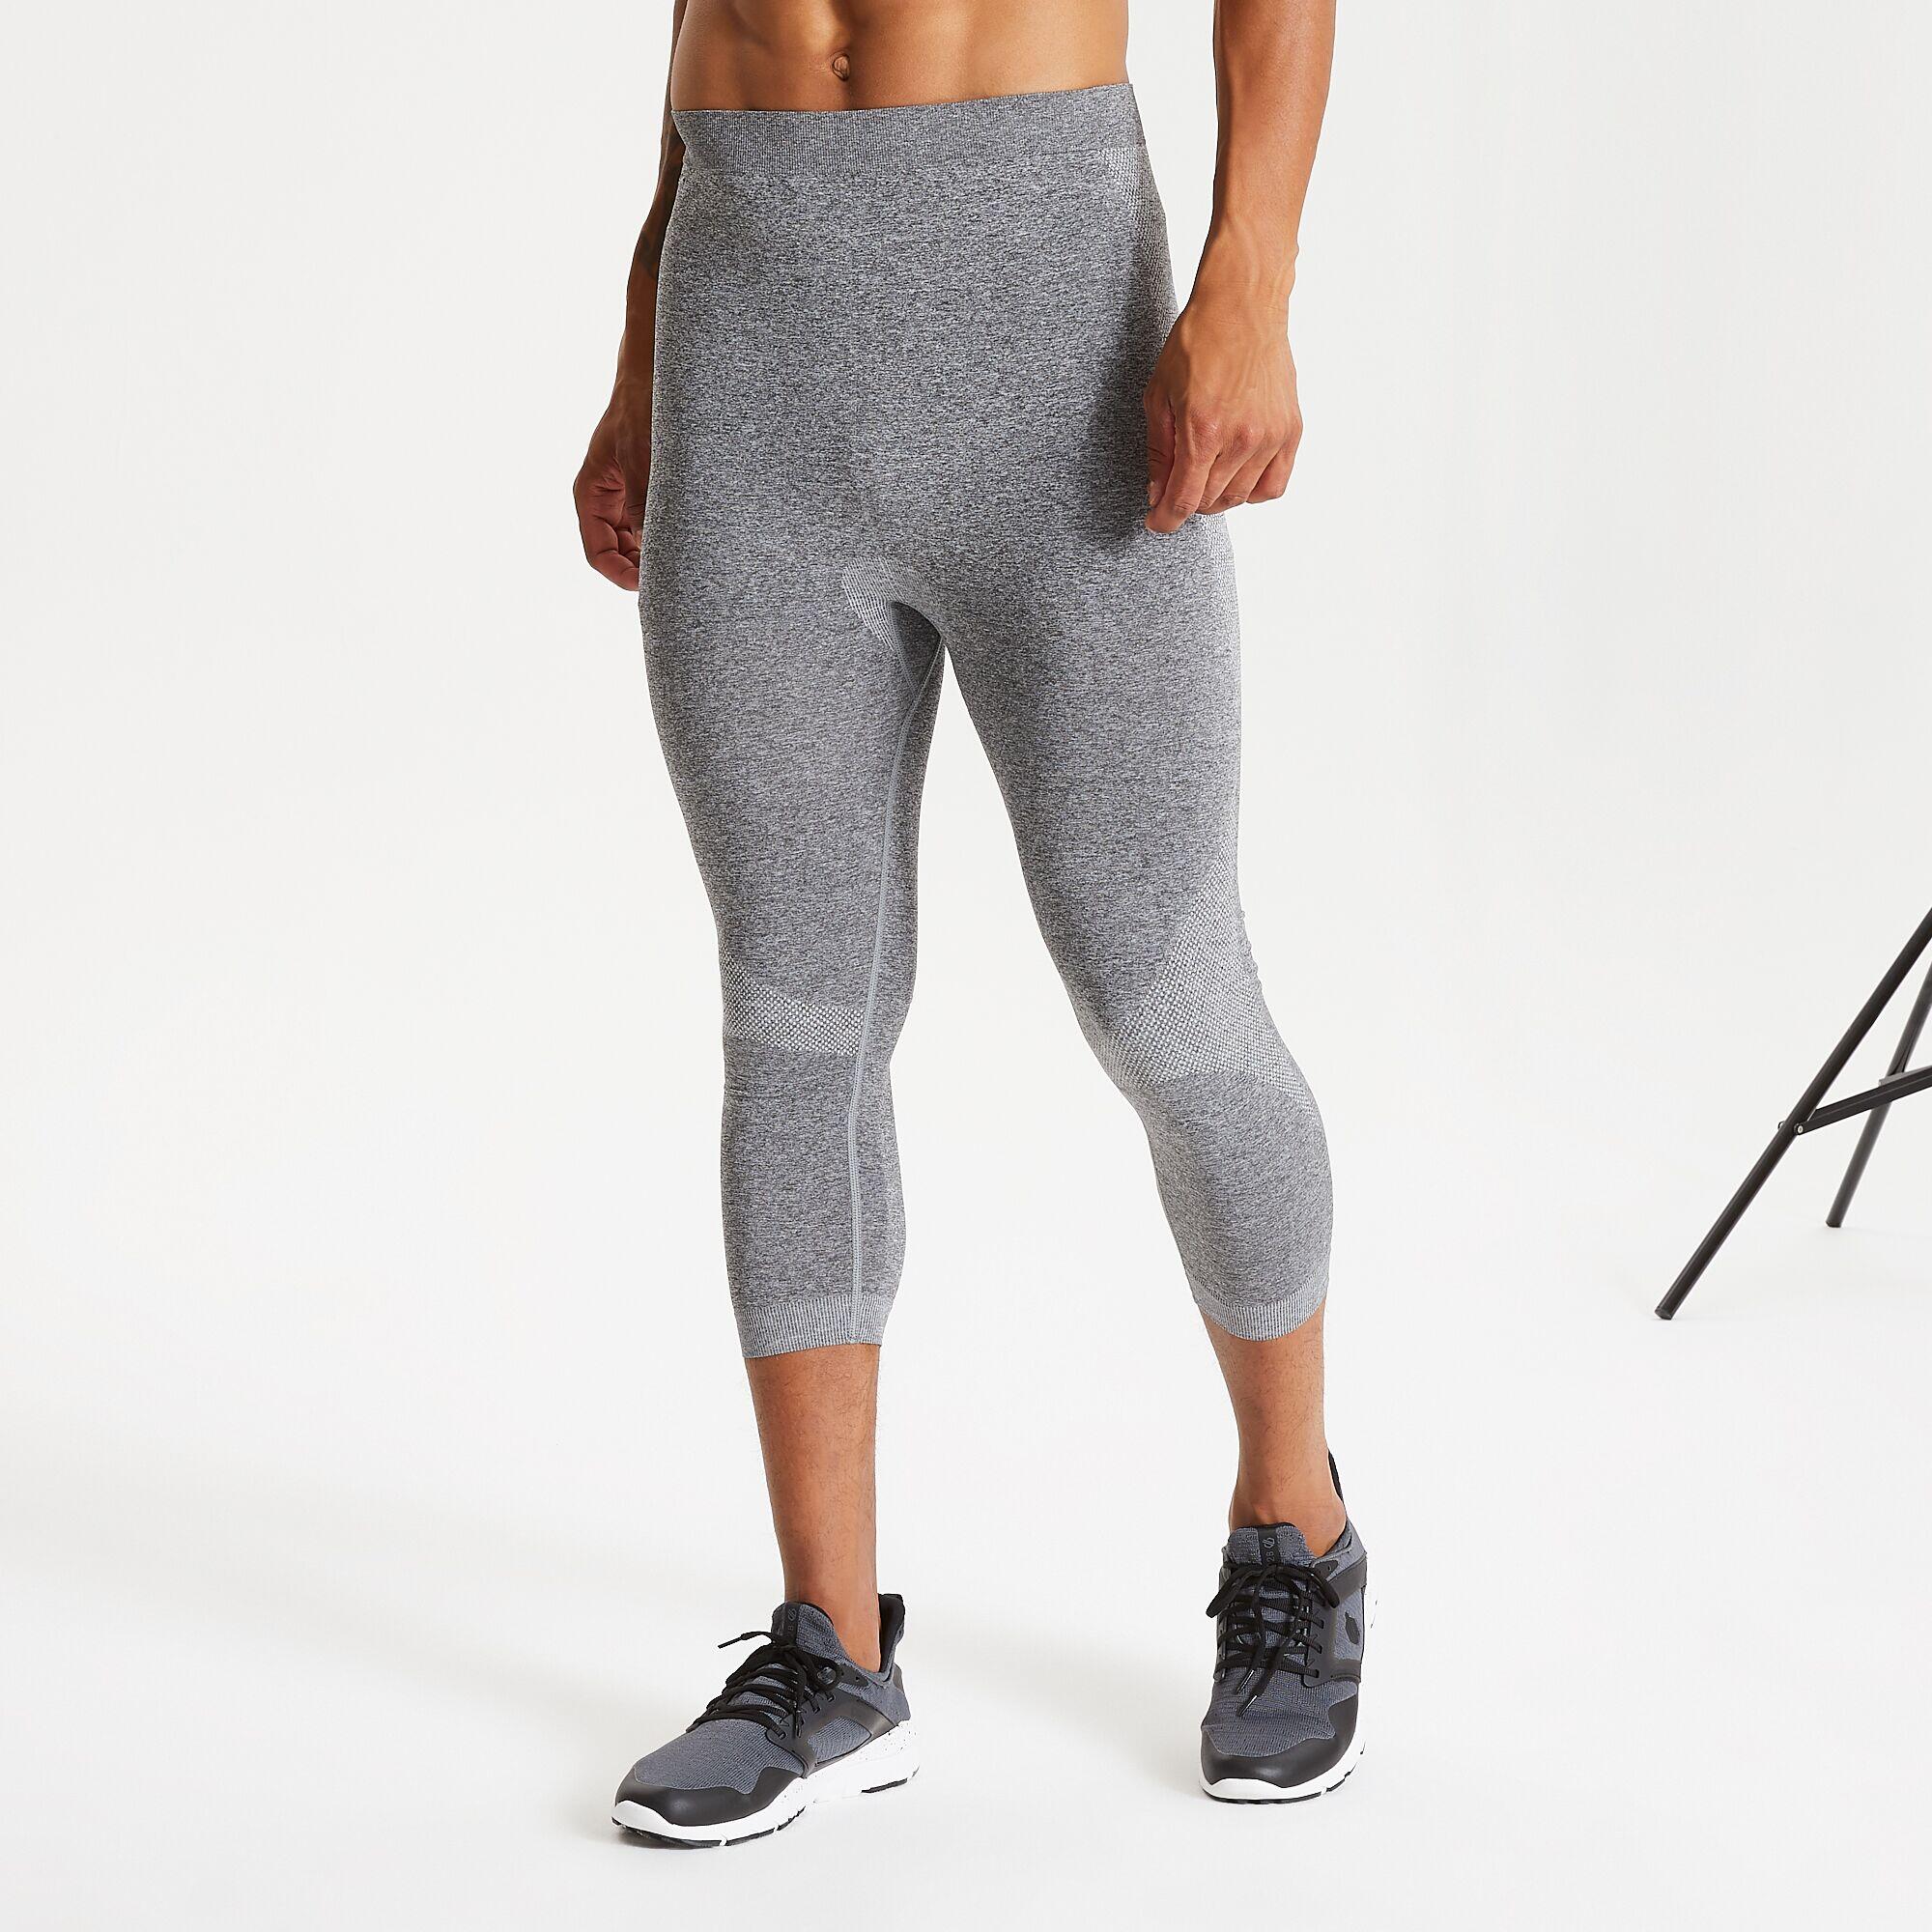 Mens In The Zone 3/4 Base Layer Leggings (Charcoal Grey Marl) 4/5